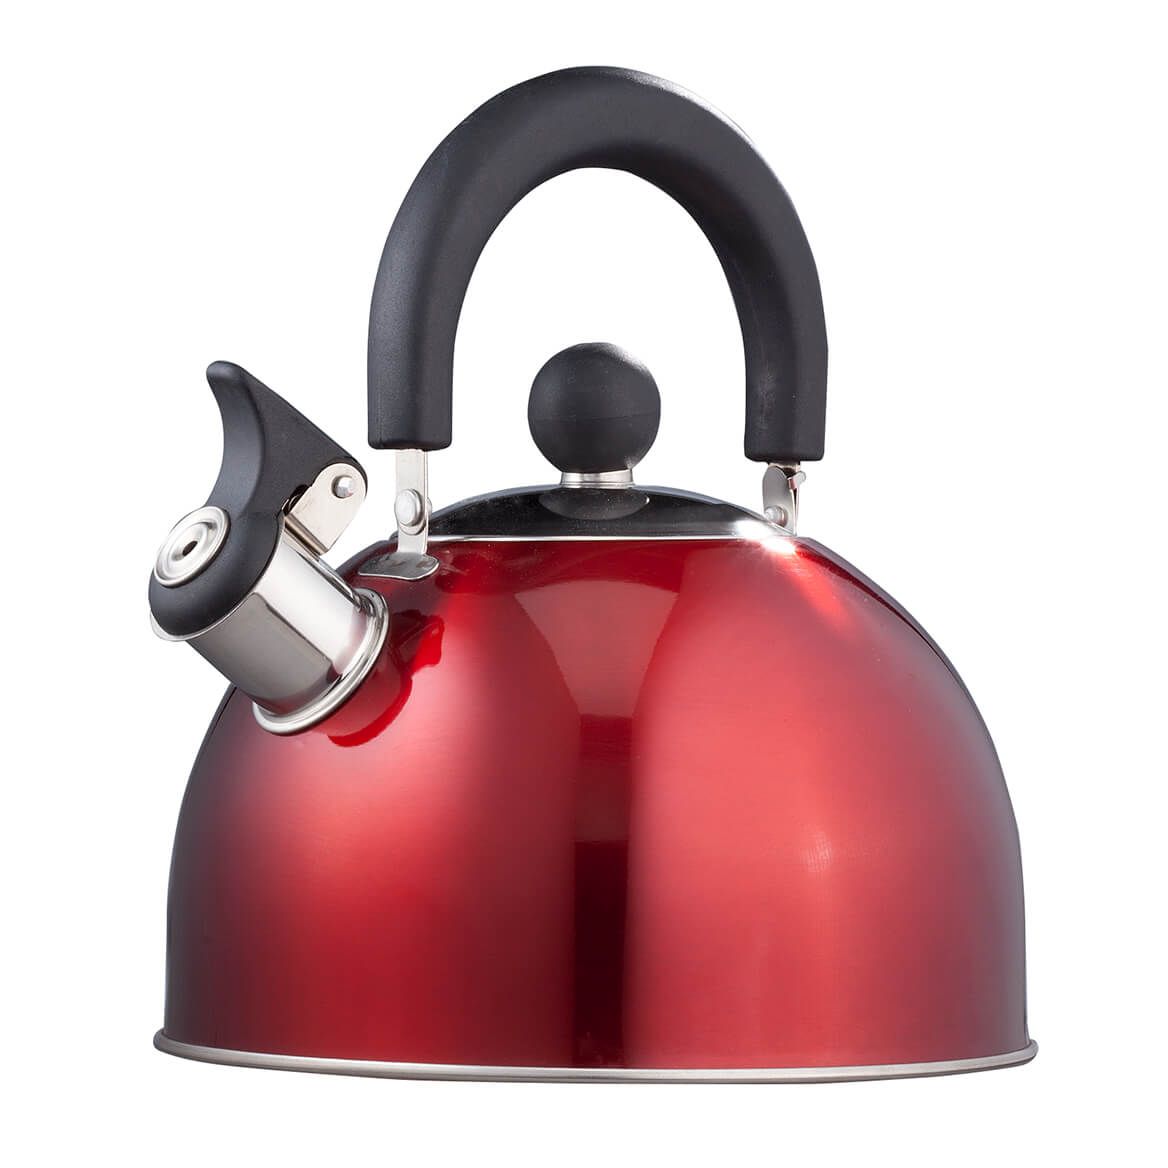 Red Whistling Tea Kettle by Home-Style Kitchen + '-' + 353543